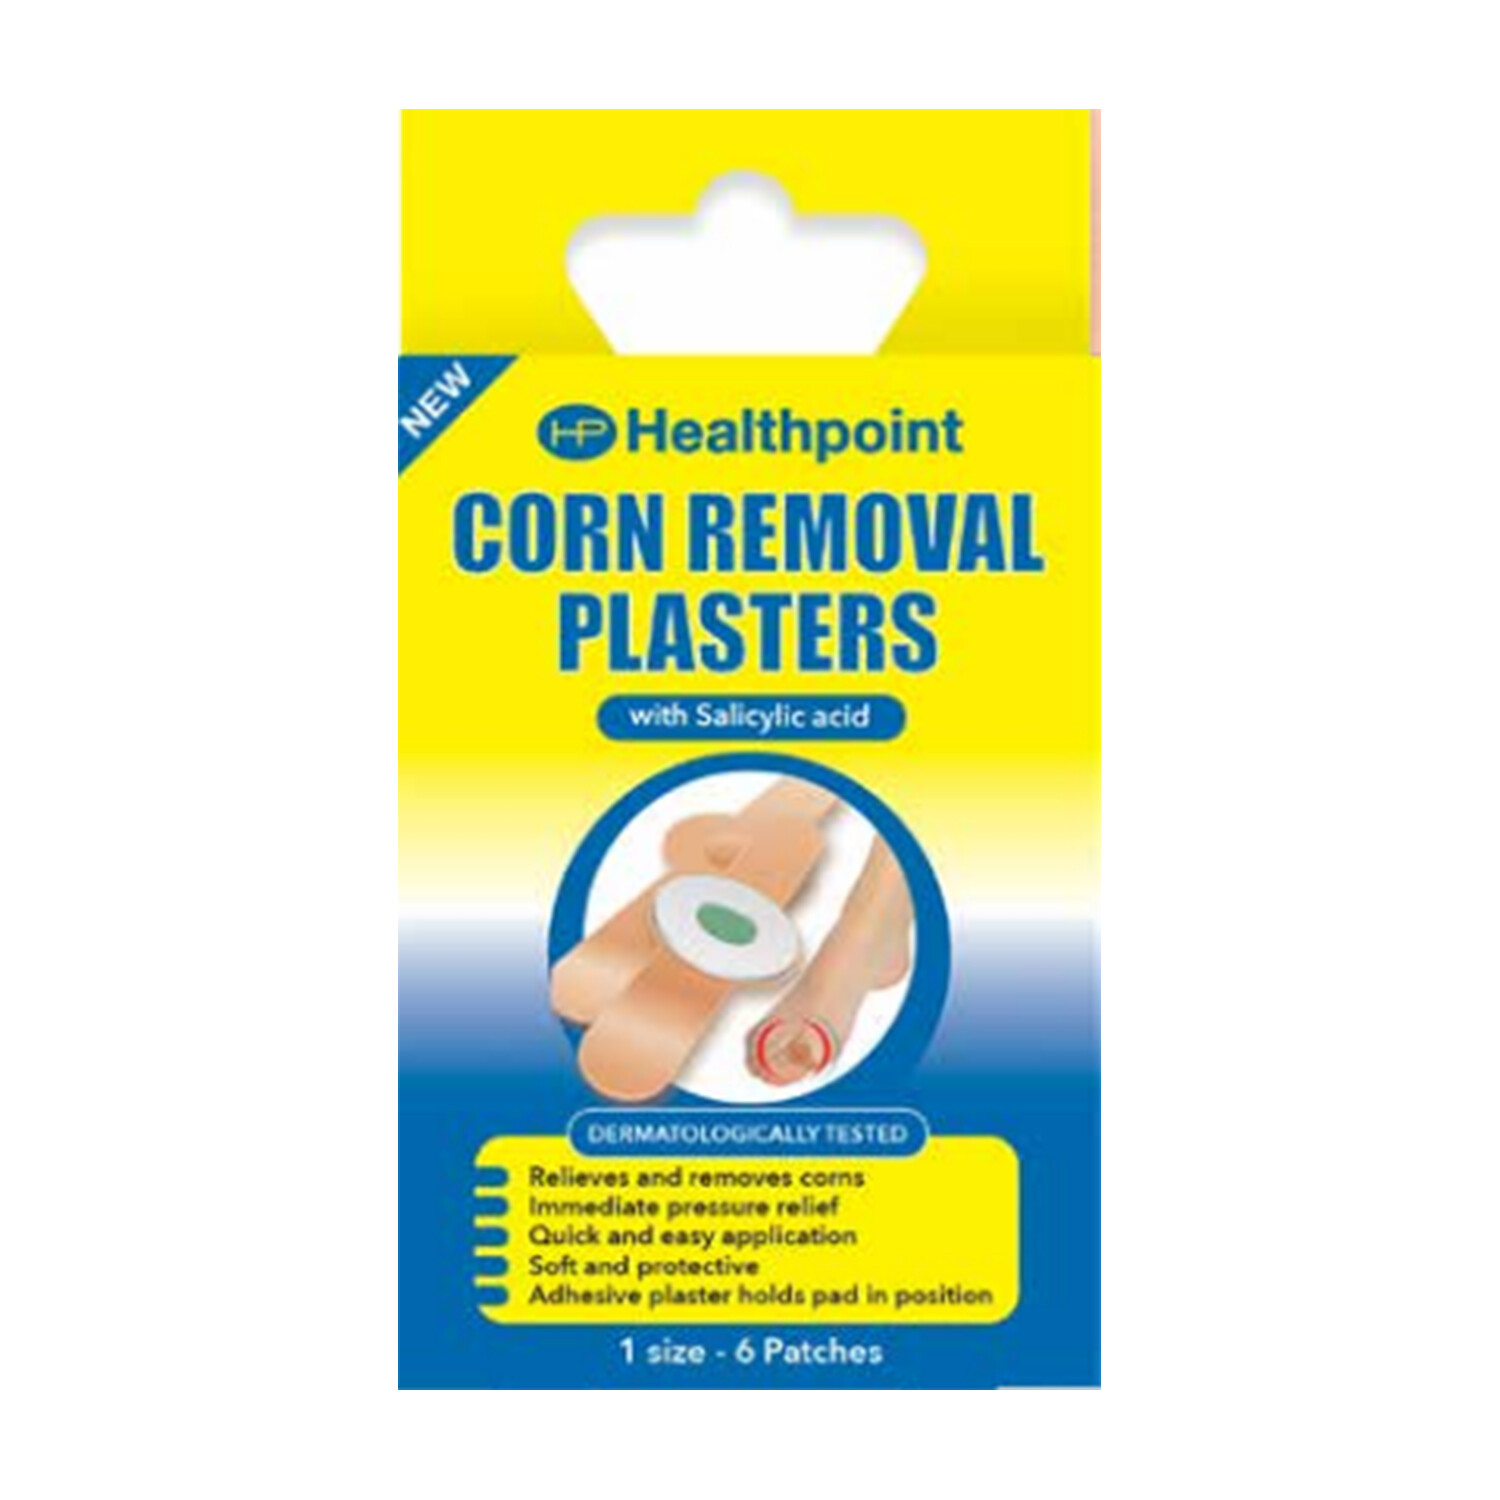 Pack of 6 Healthpoint Corn Removal Plasters Image